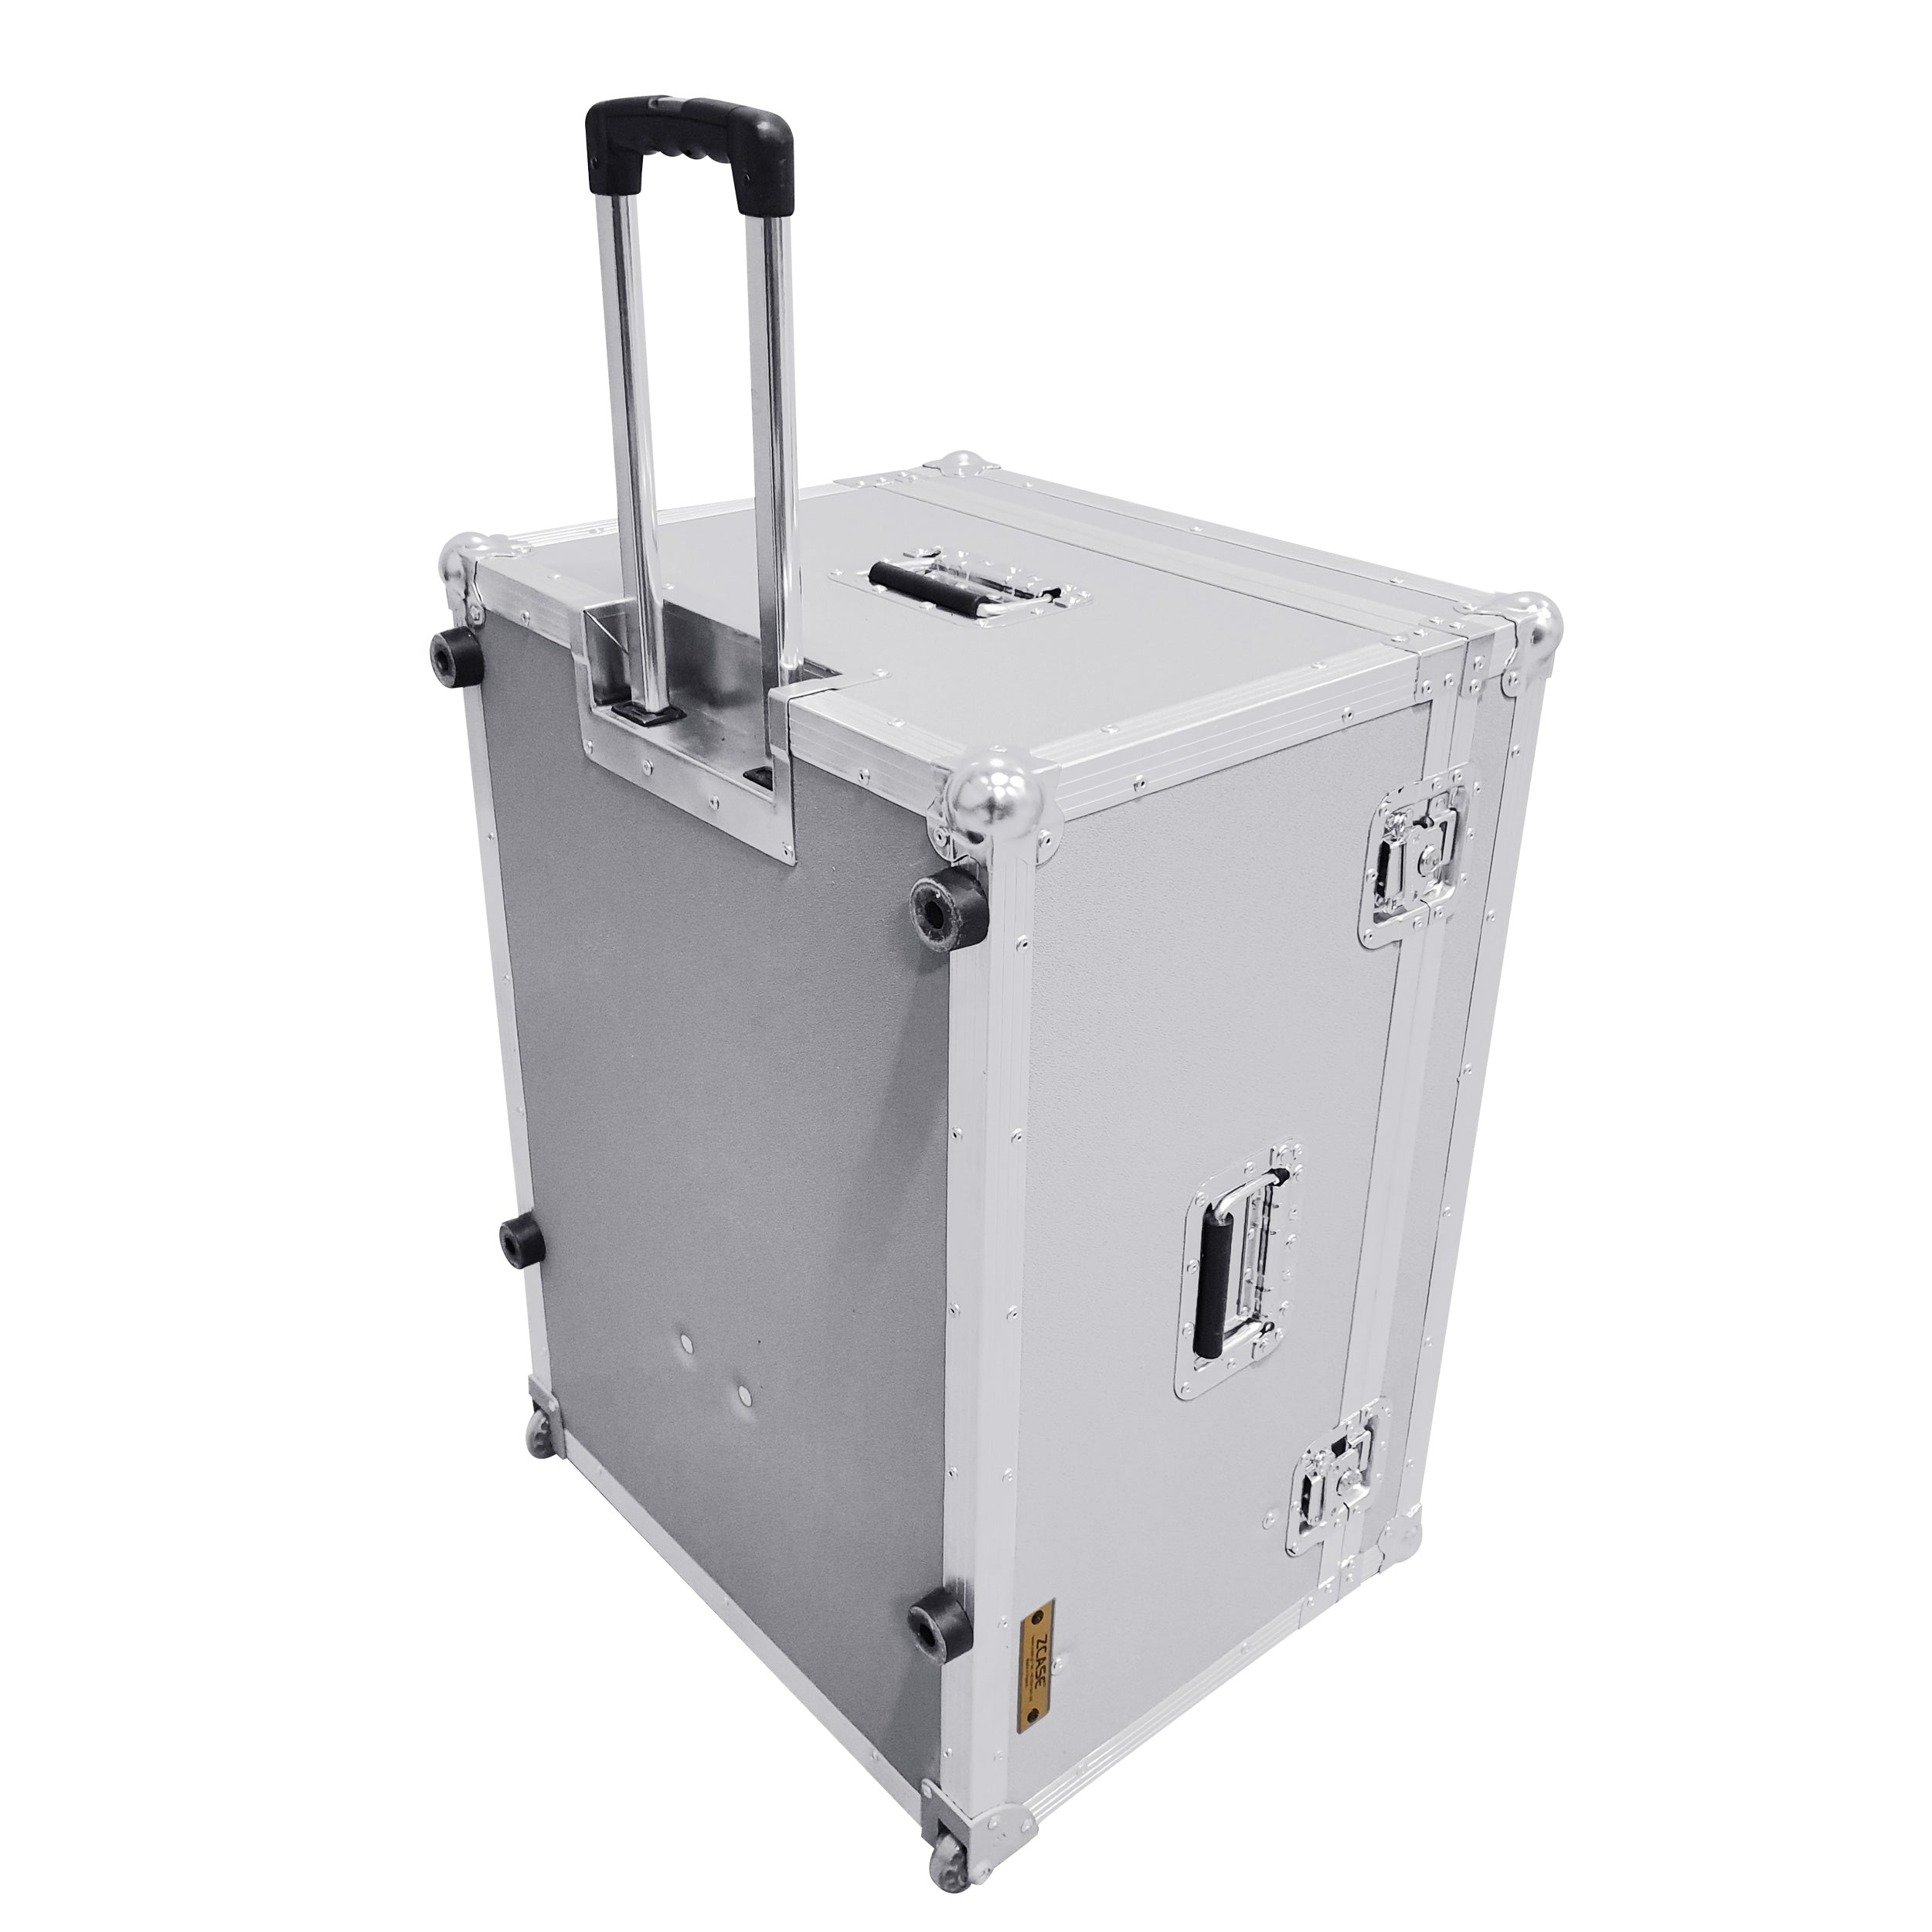 Pro X For WAVES eMotion LV1 Live Mixer ATA Rolling Retractable Handle Road Case by ZCASE XZF-WAVESLV13UCASE